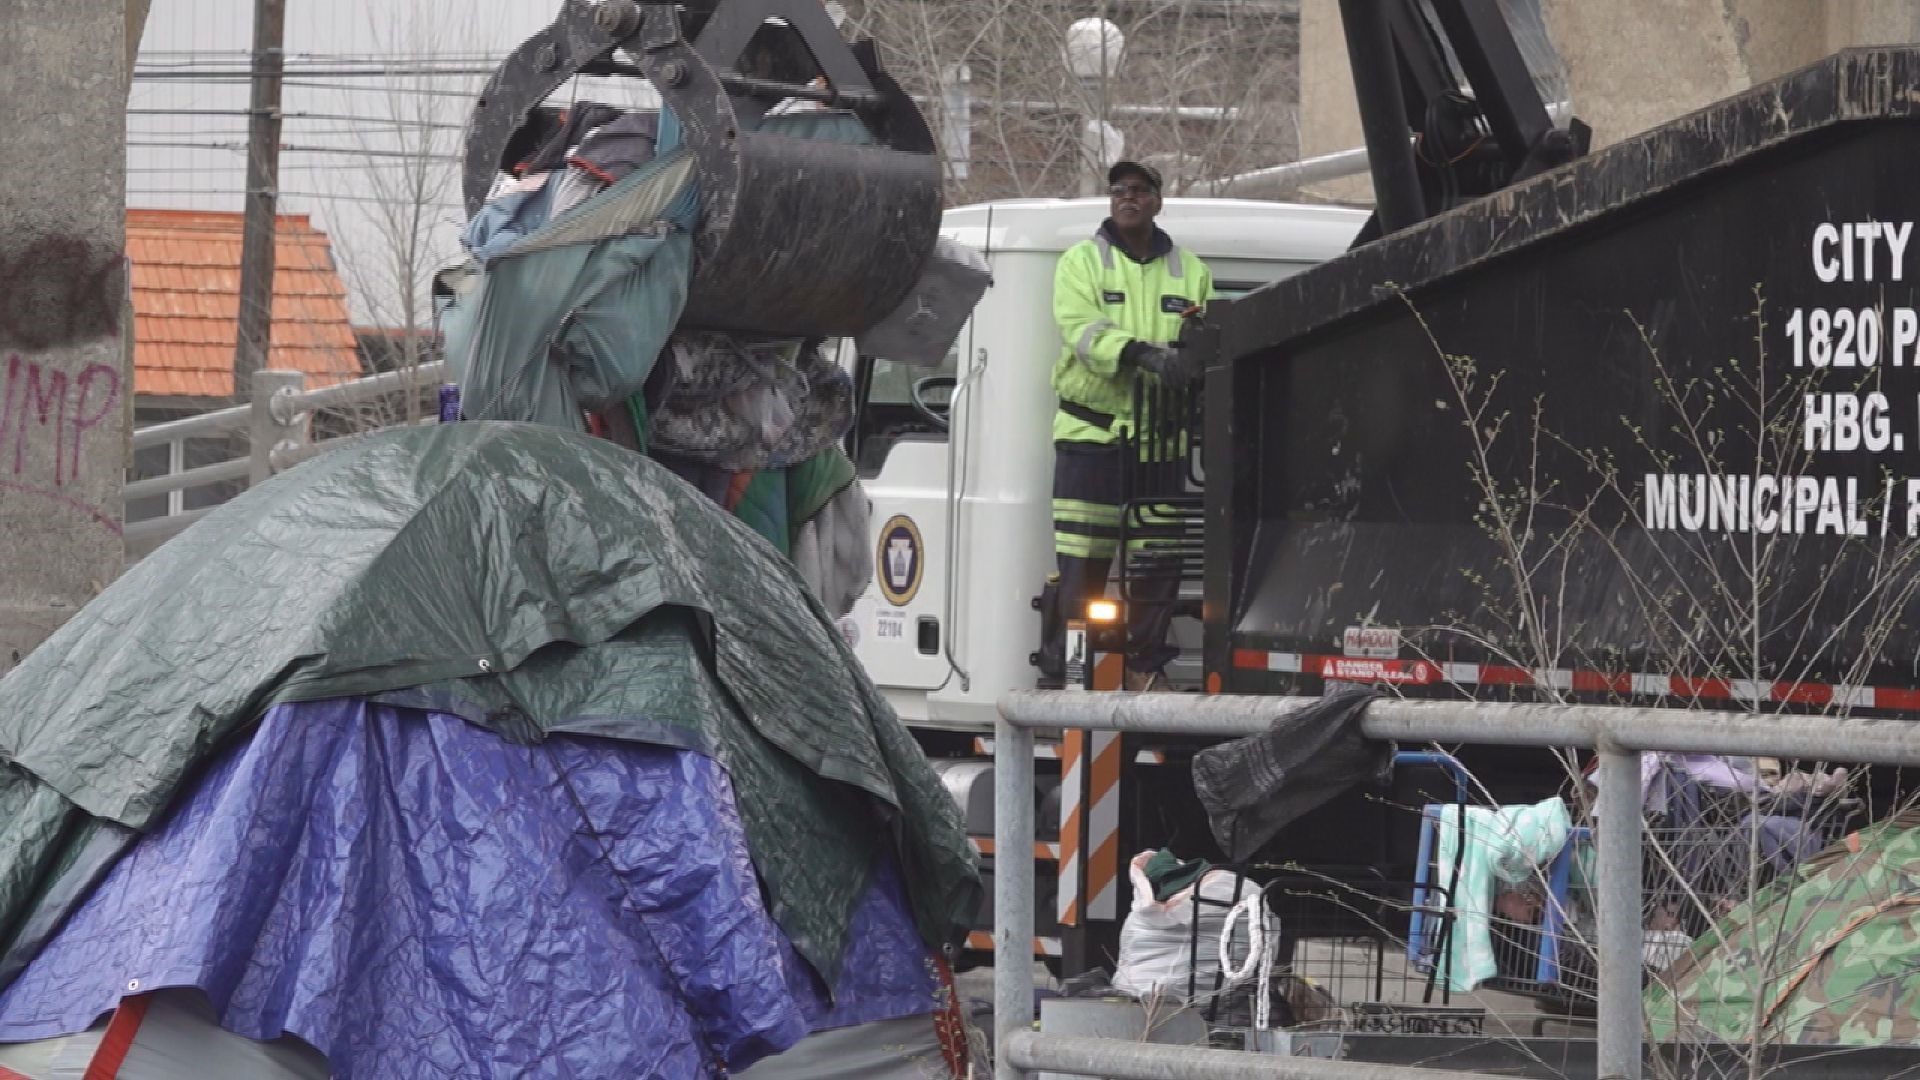 The city's Public Works Department has teamed up with several community groups to clean up the homeless encampment under the Mulberry Street Bridge.